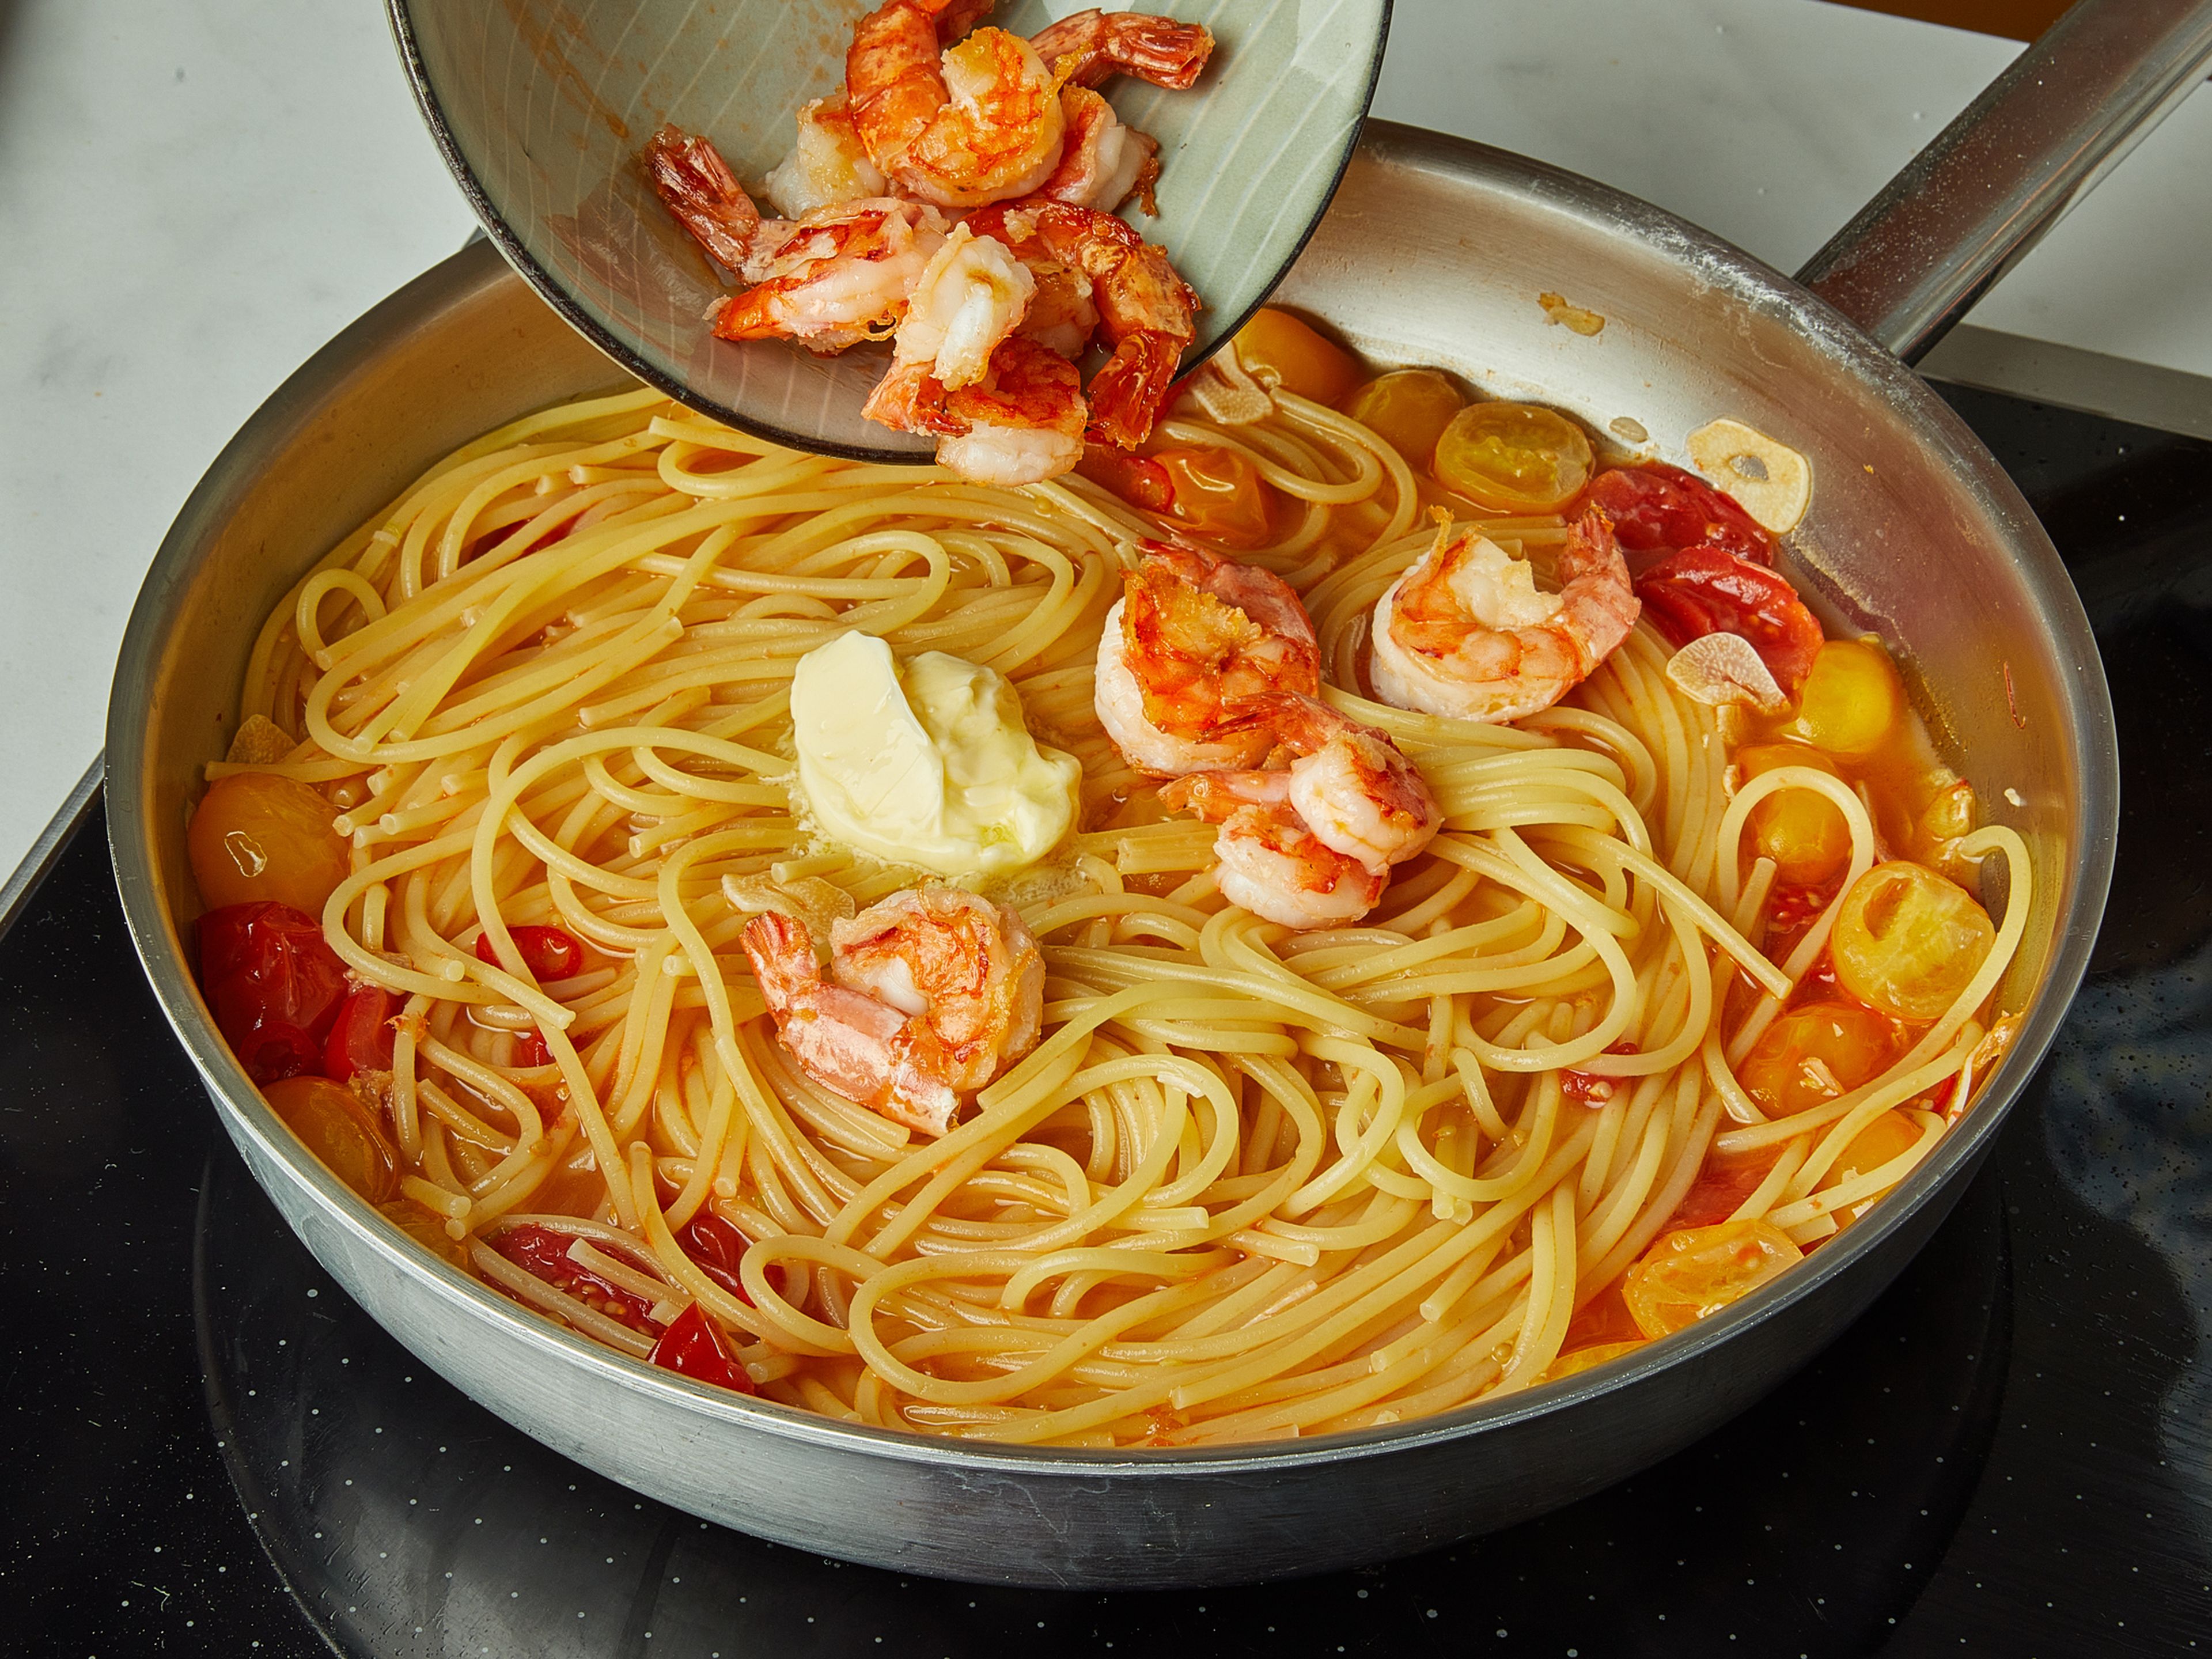 Remove the lid, add the butter, and let simmer for another 5 min., until the sauce is thick and glossy. Finally, add shrimp and warm through briefly. Arrange pasta on plates and garnish with basil leaves.